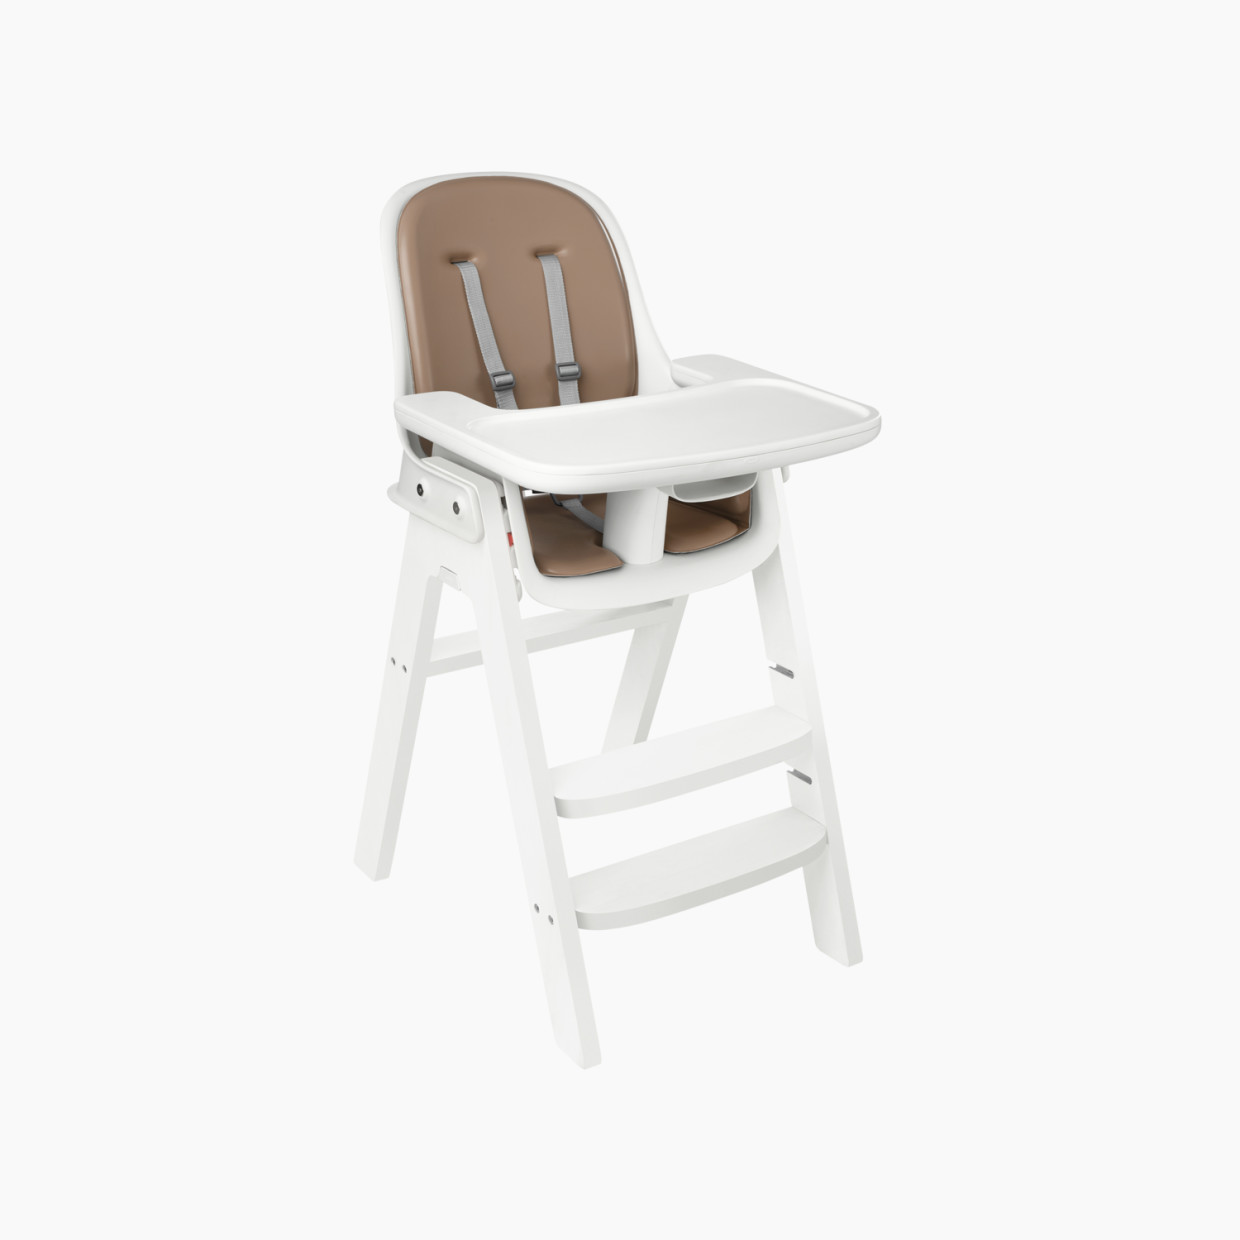 OXO Tot Sprout High Chair - Taupe/White.